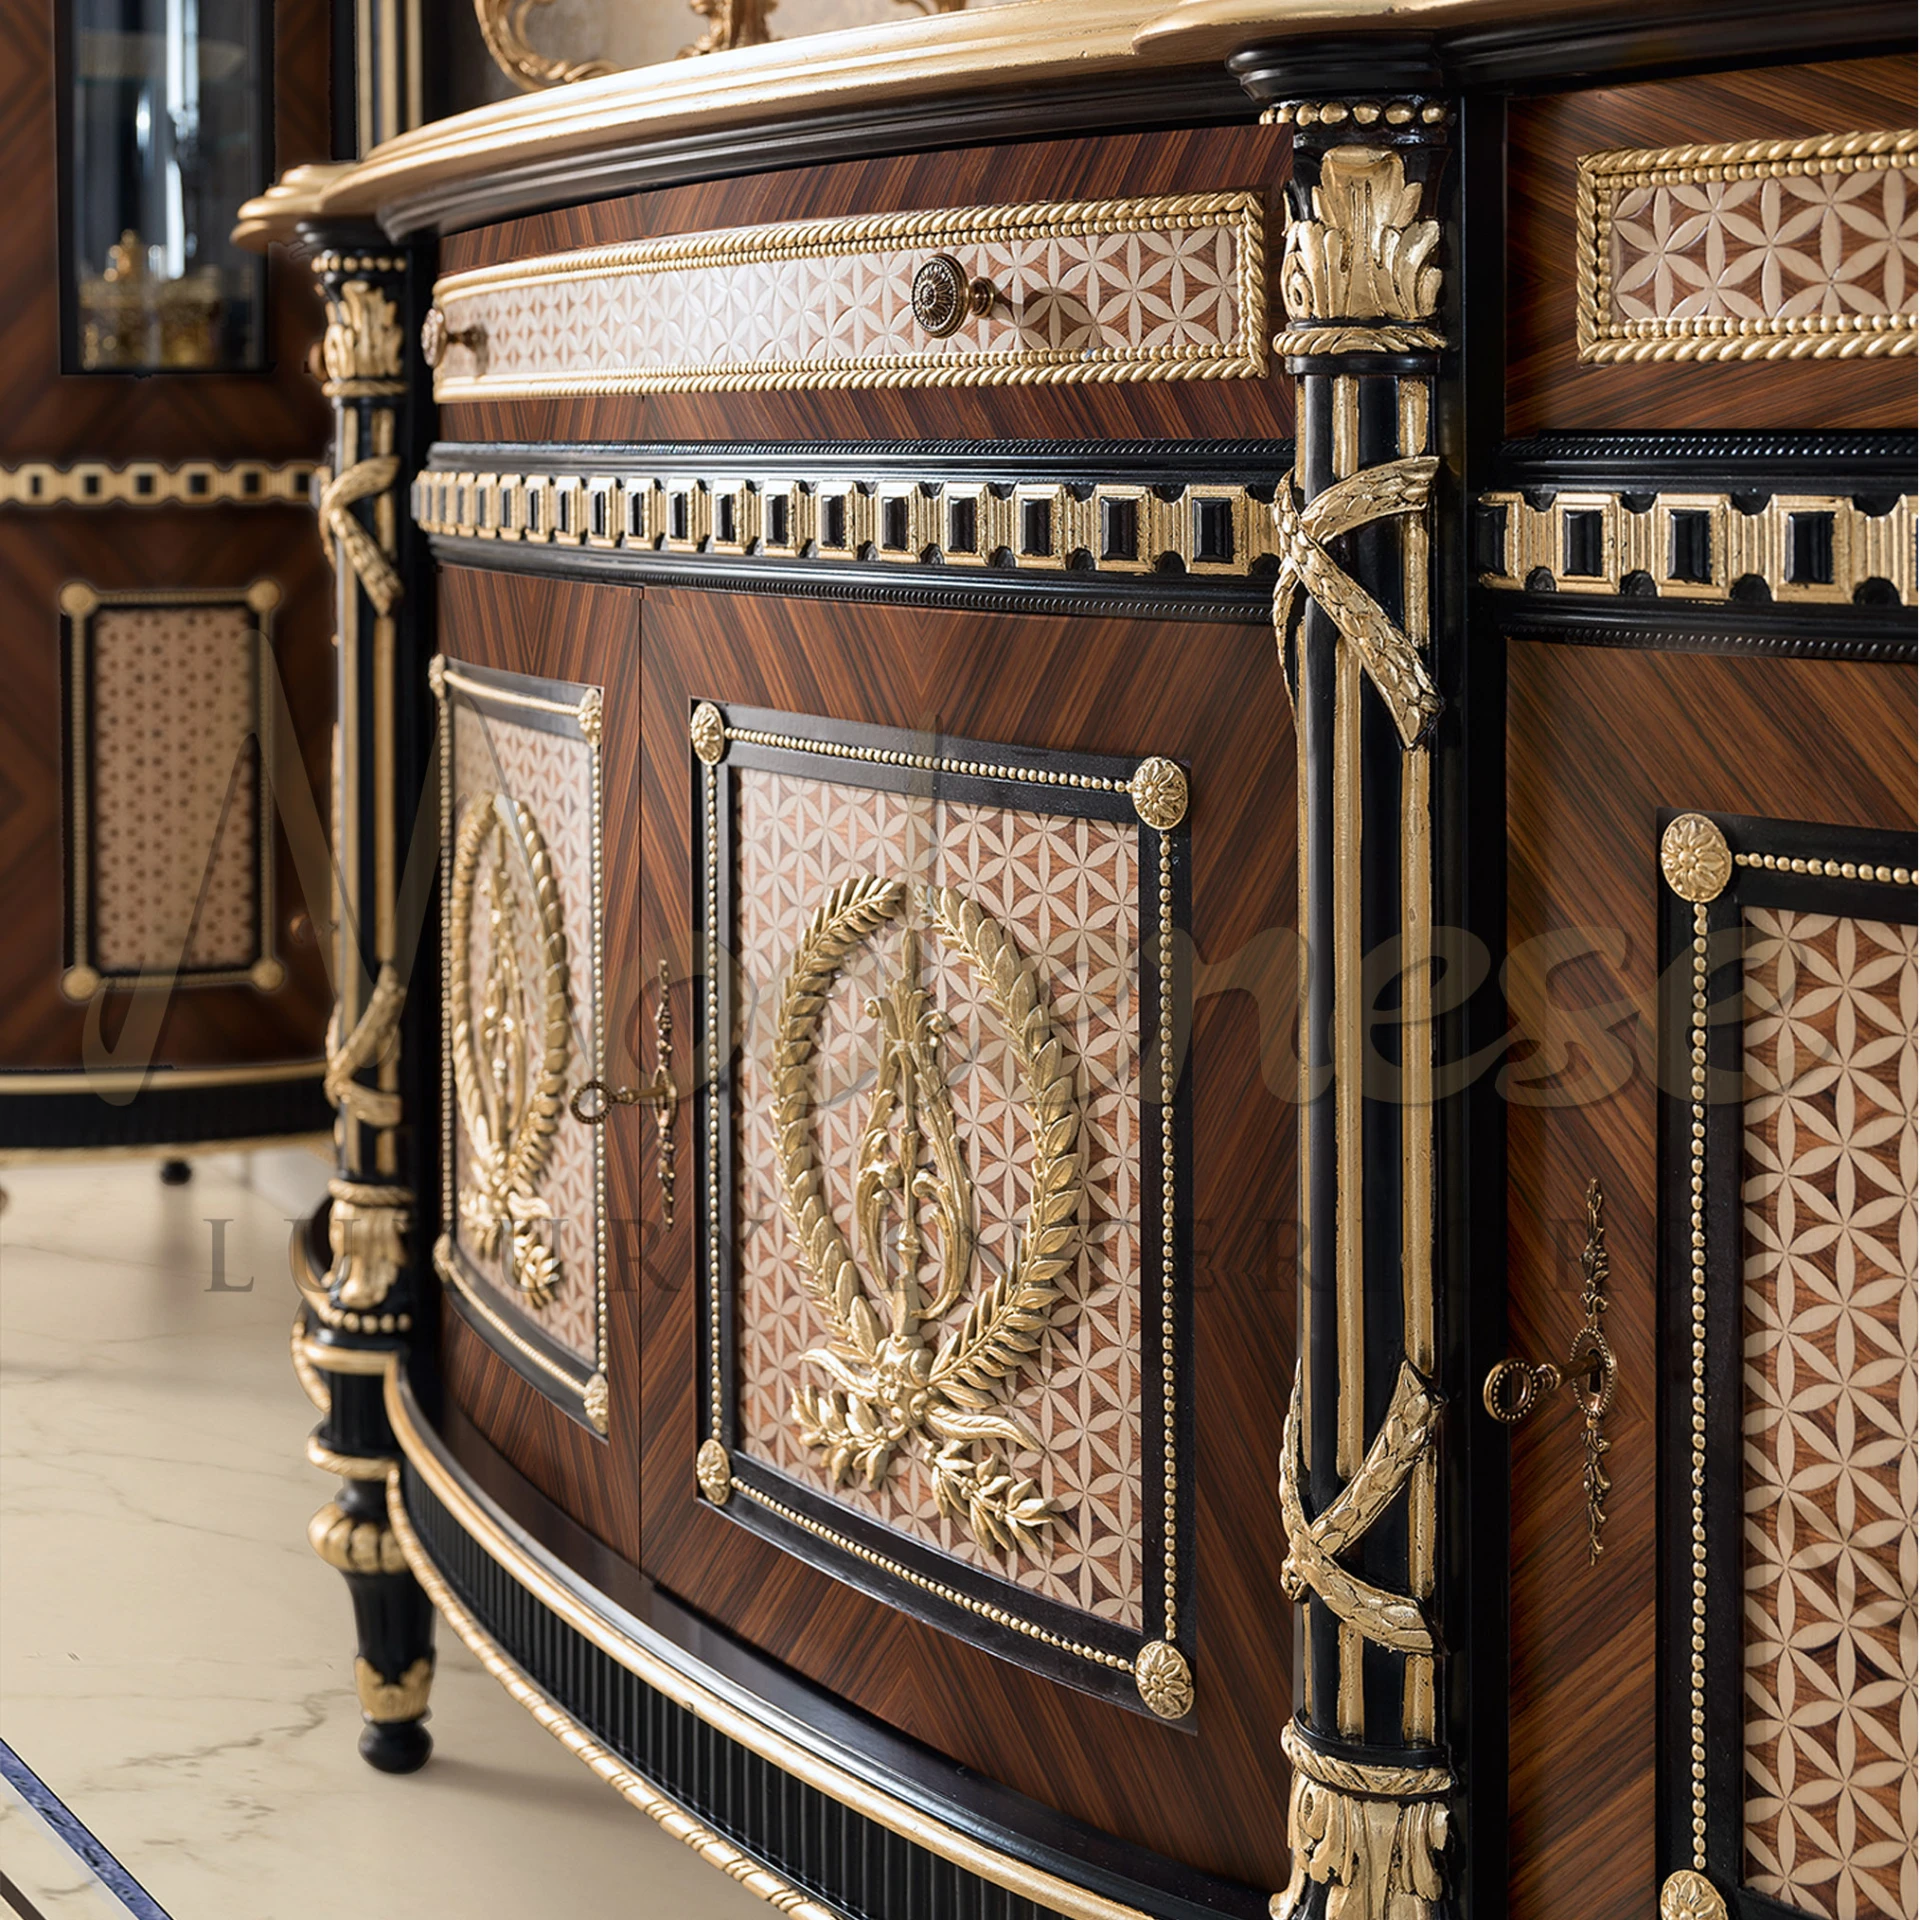 Exquisite oblique wooden panel with black lacquered edge and golden decorations. A true representation of Modenese Furniture's craftsmanship and elegance.